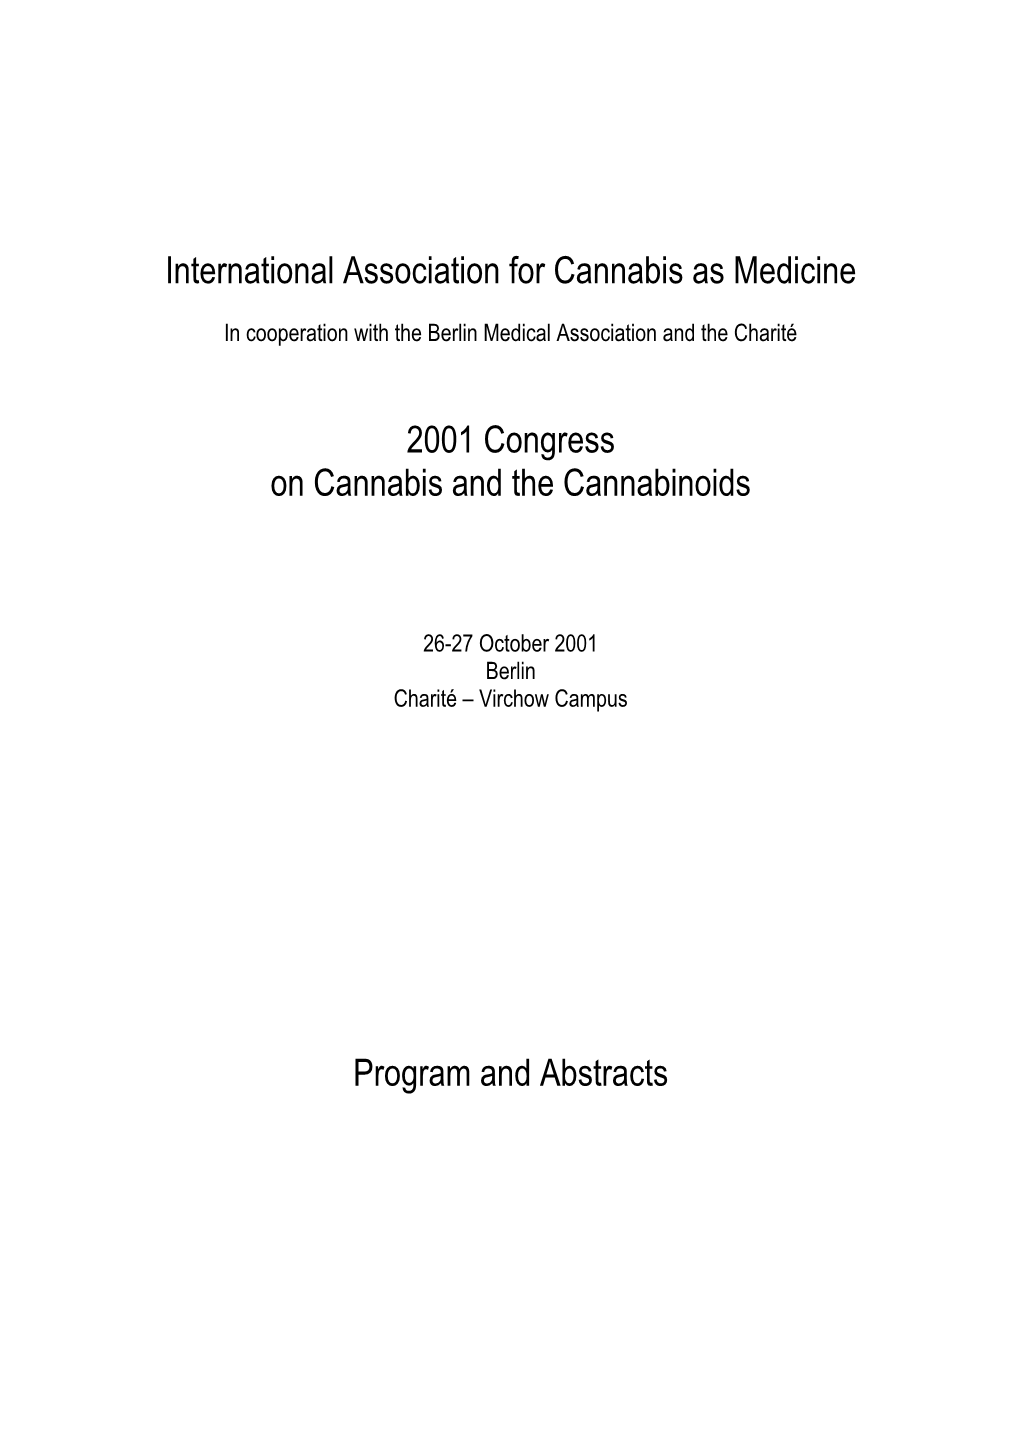 International Association for Cannabis As Medicine 2001 Congress on Cannabis and the Cannabinoids Program and Abstracts